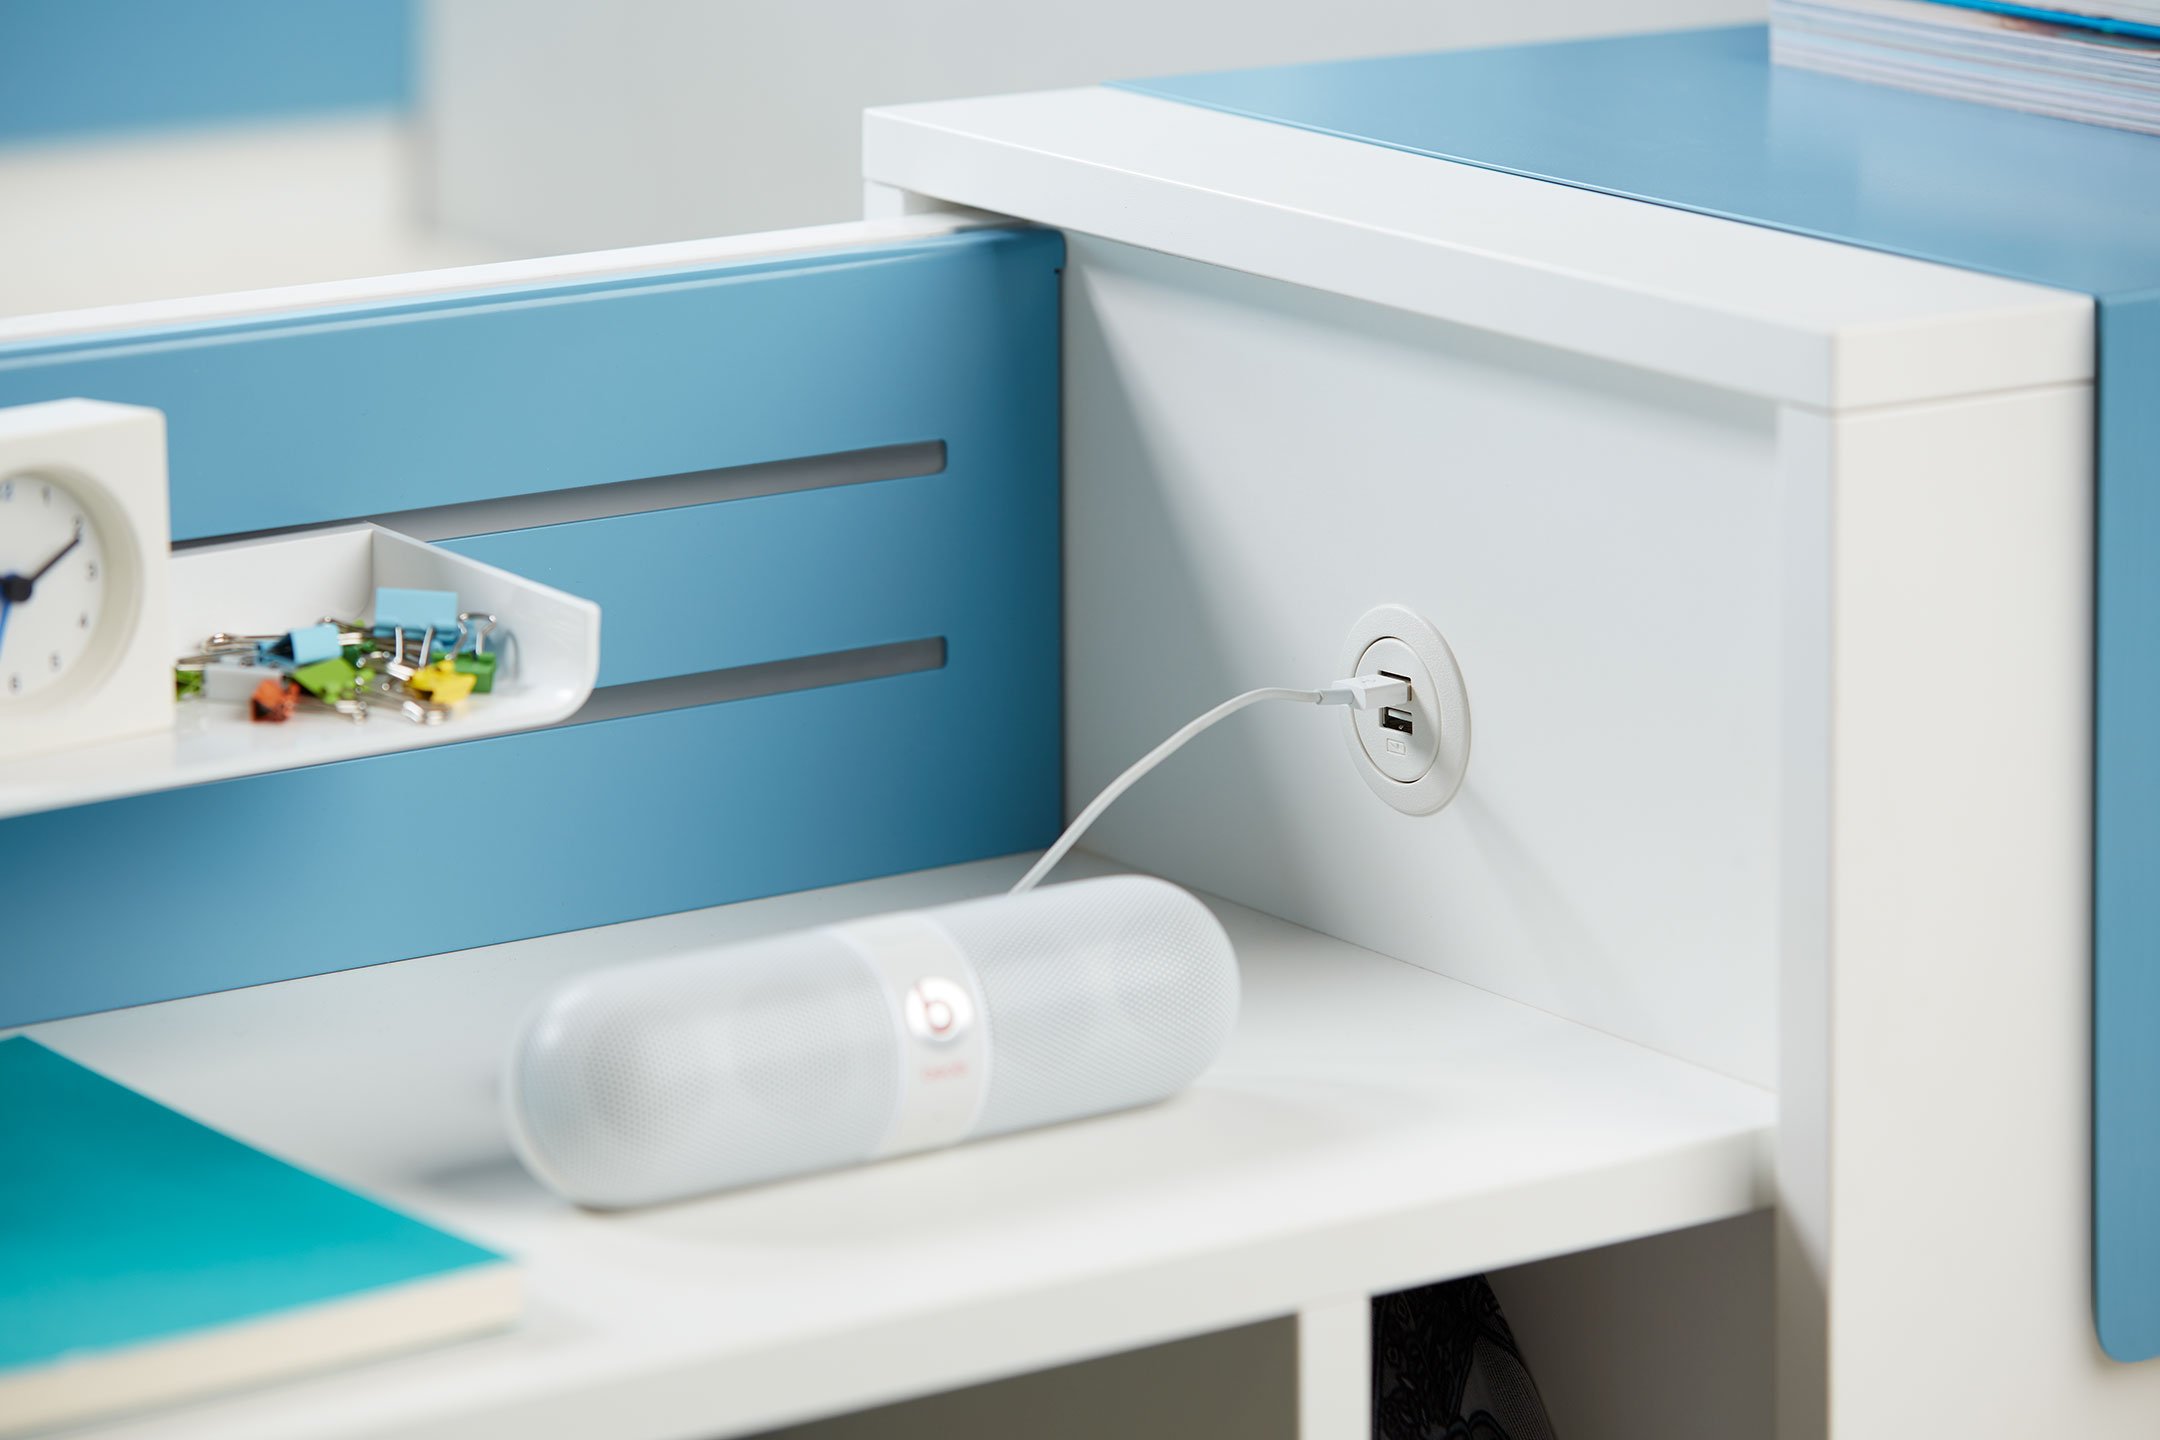 Beside storage pantry with USB charging capabilities in white